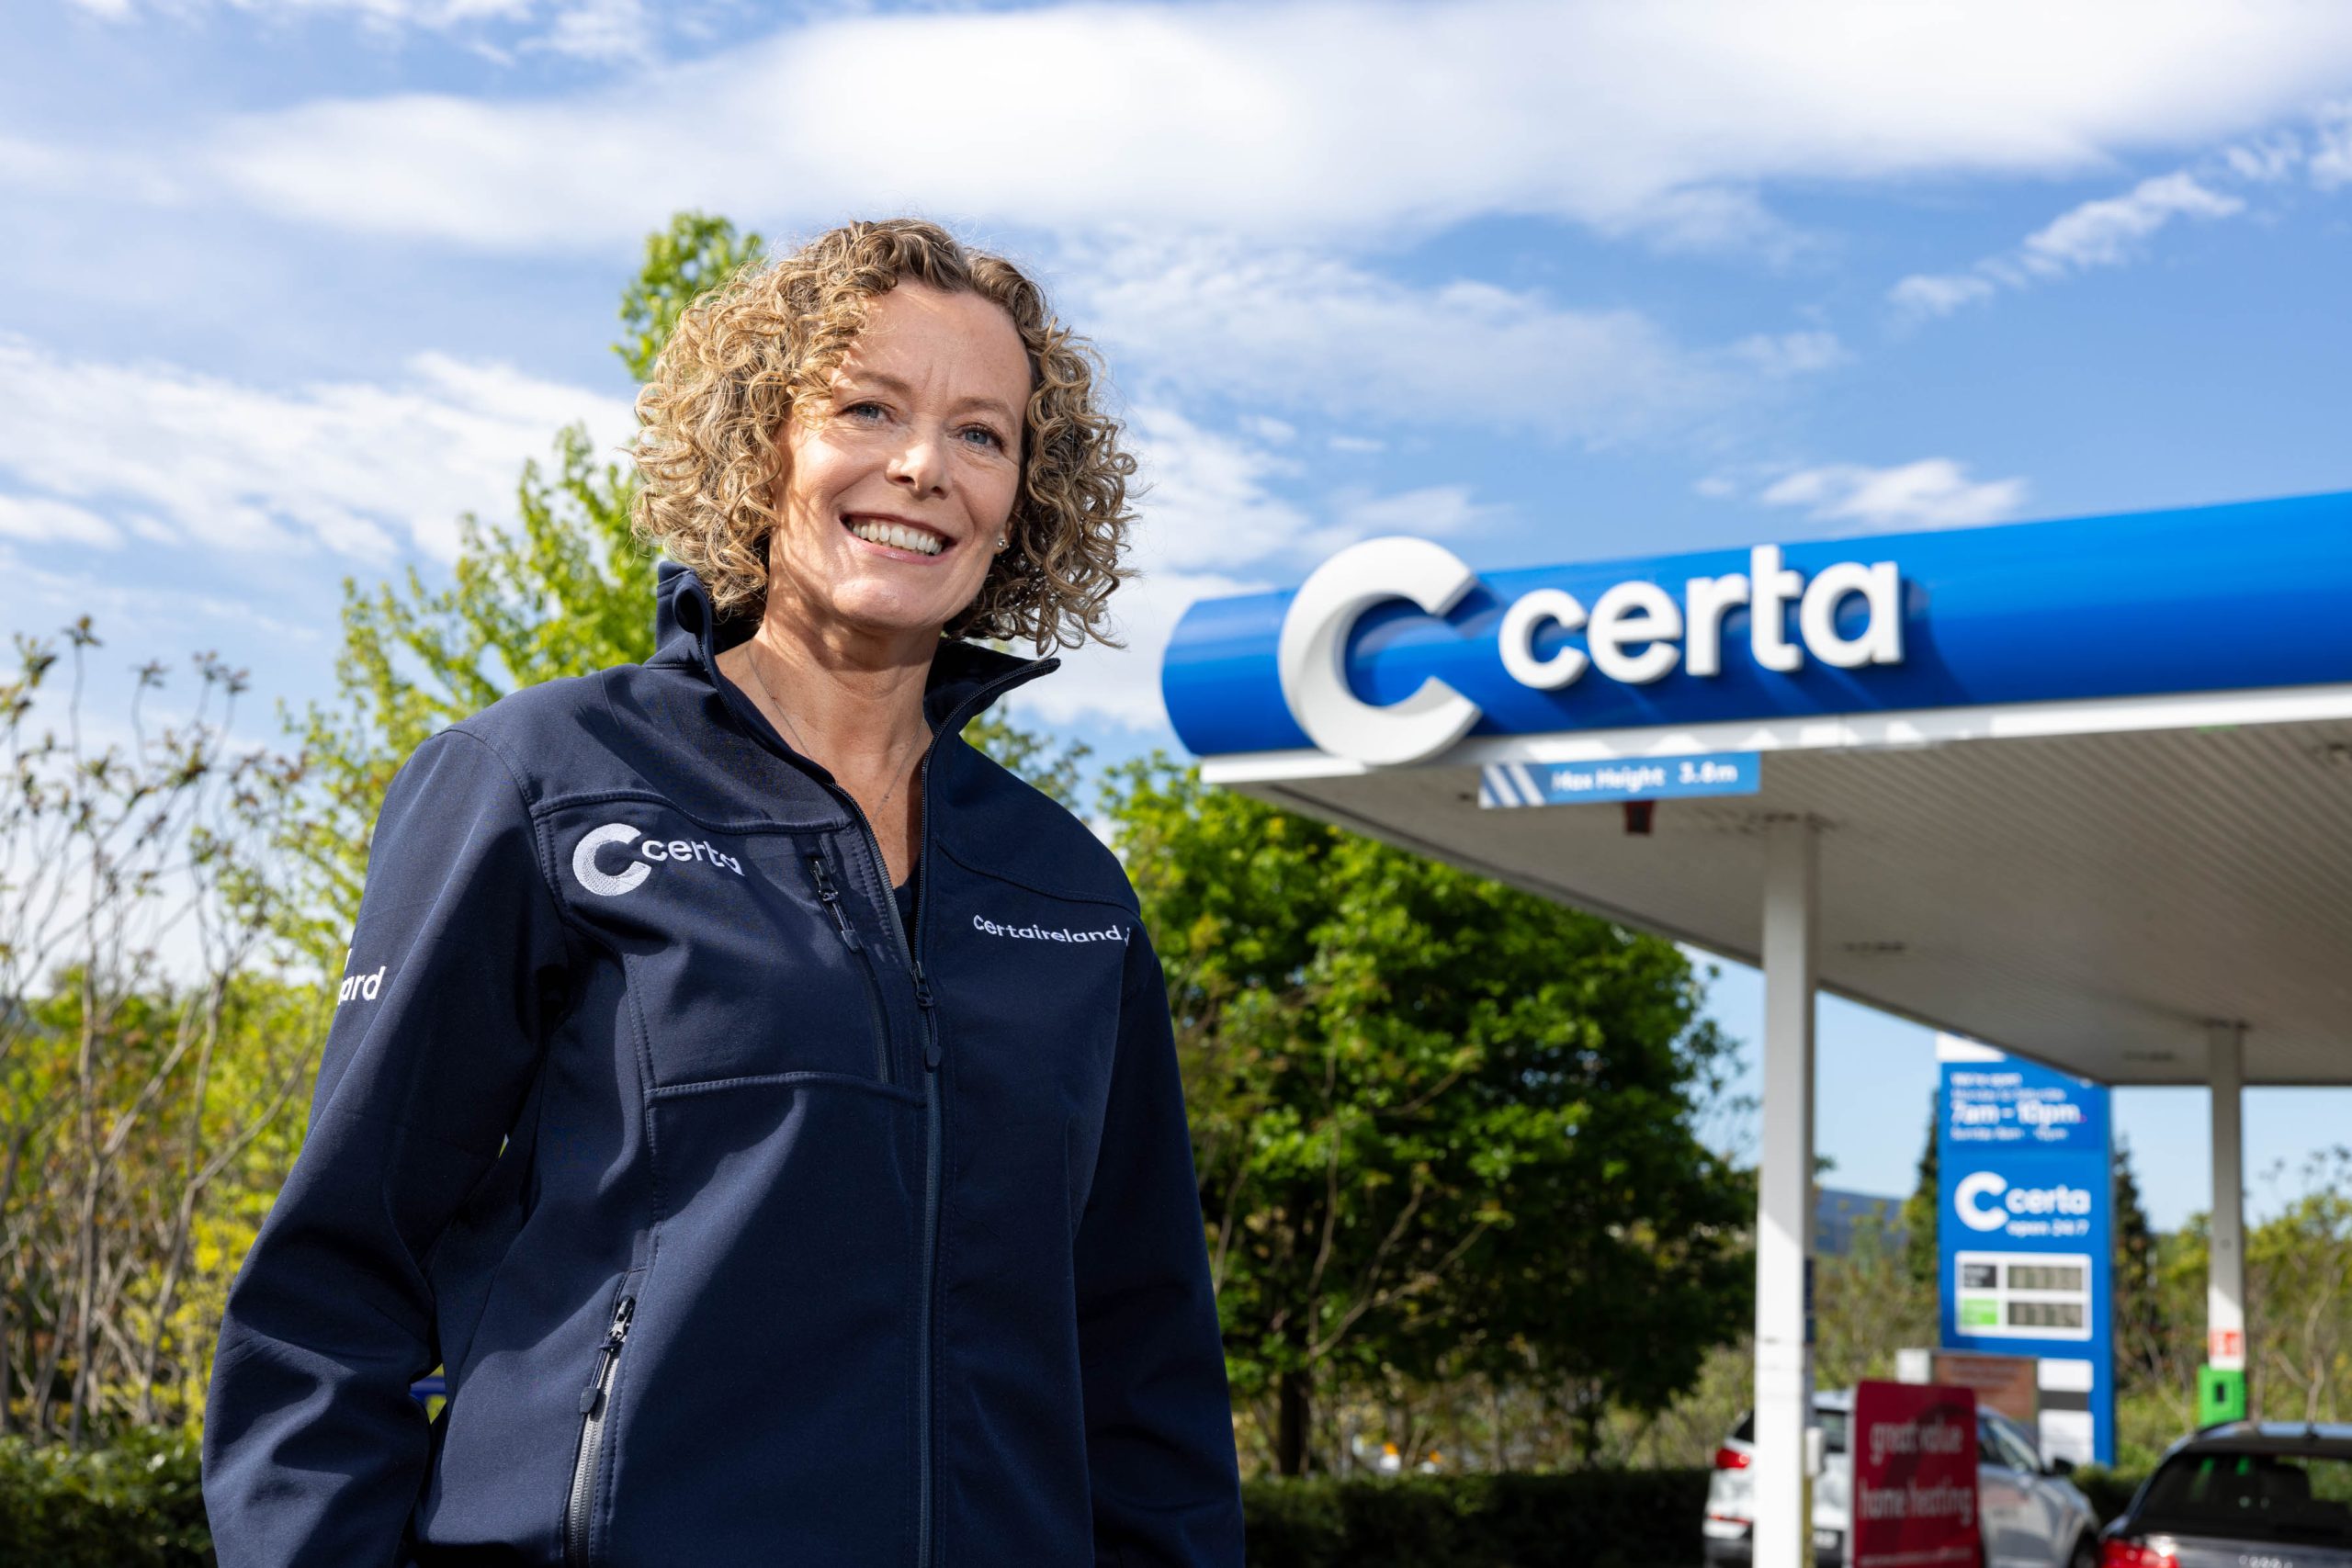 Certa appoints Orla Stevens as new Managing Director